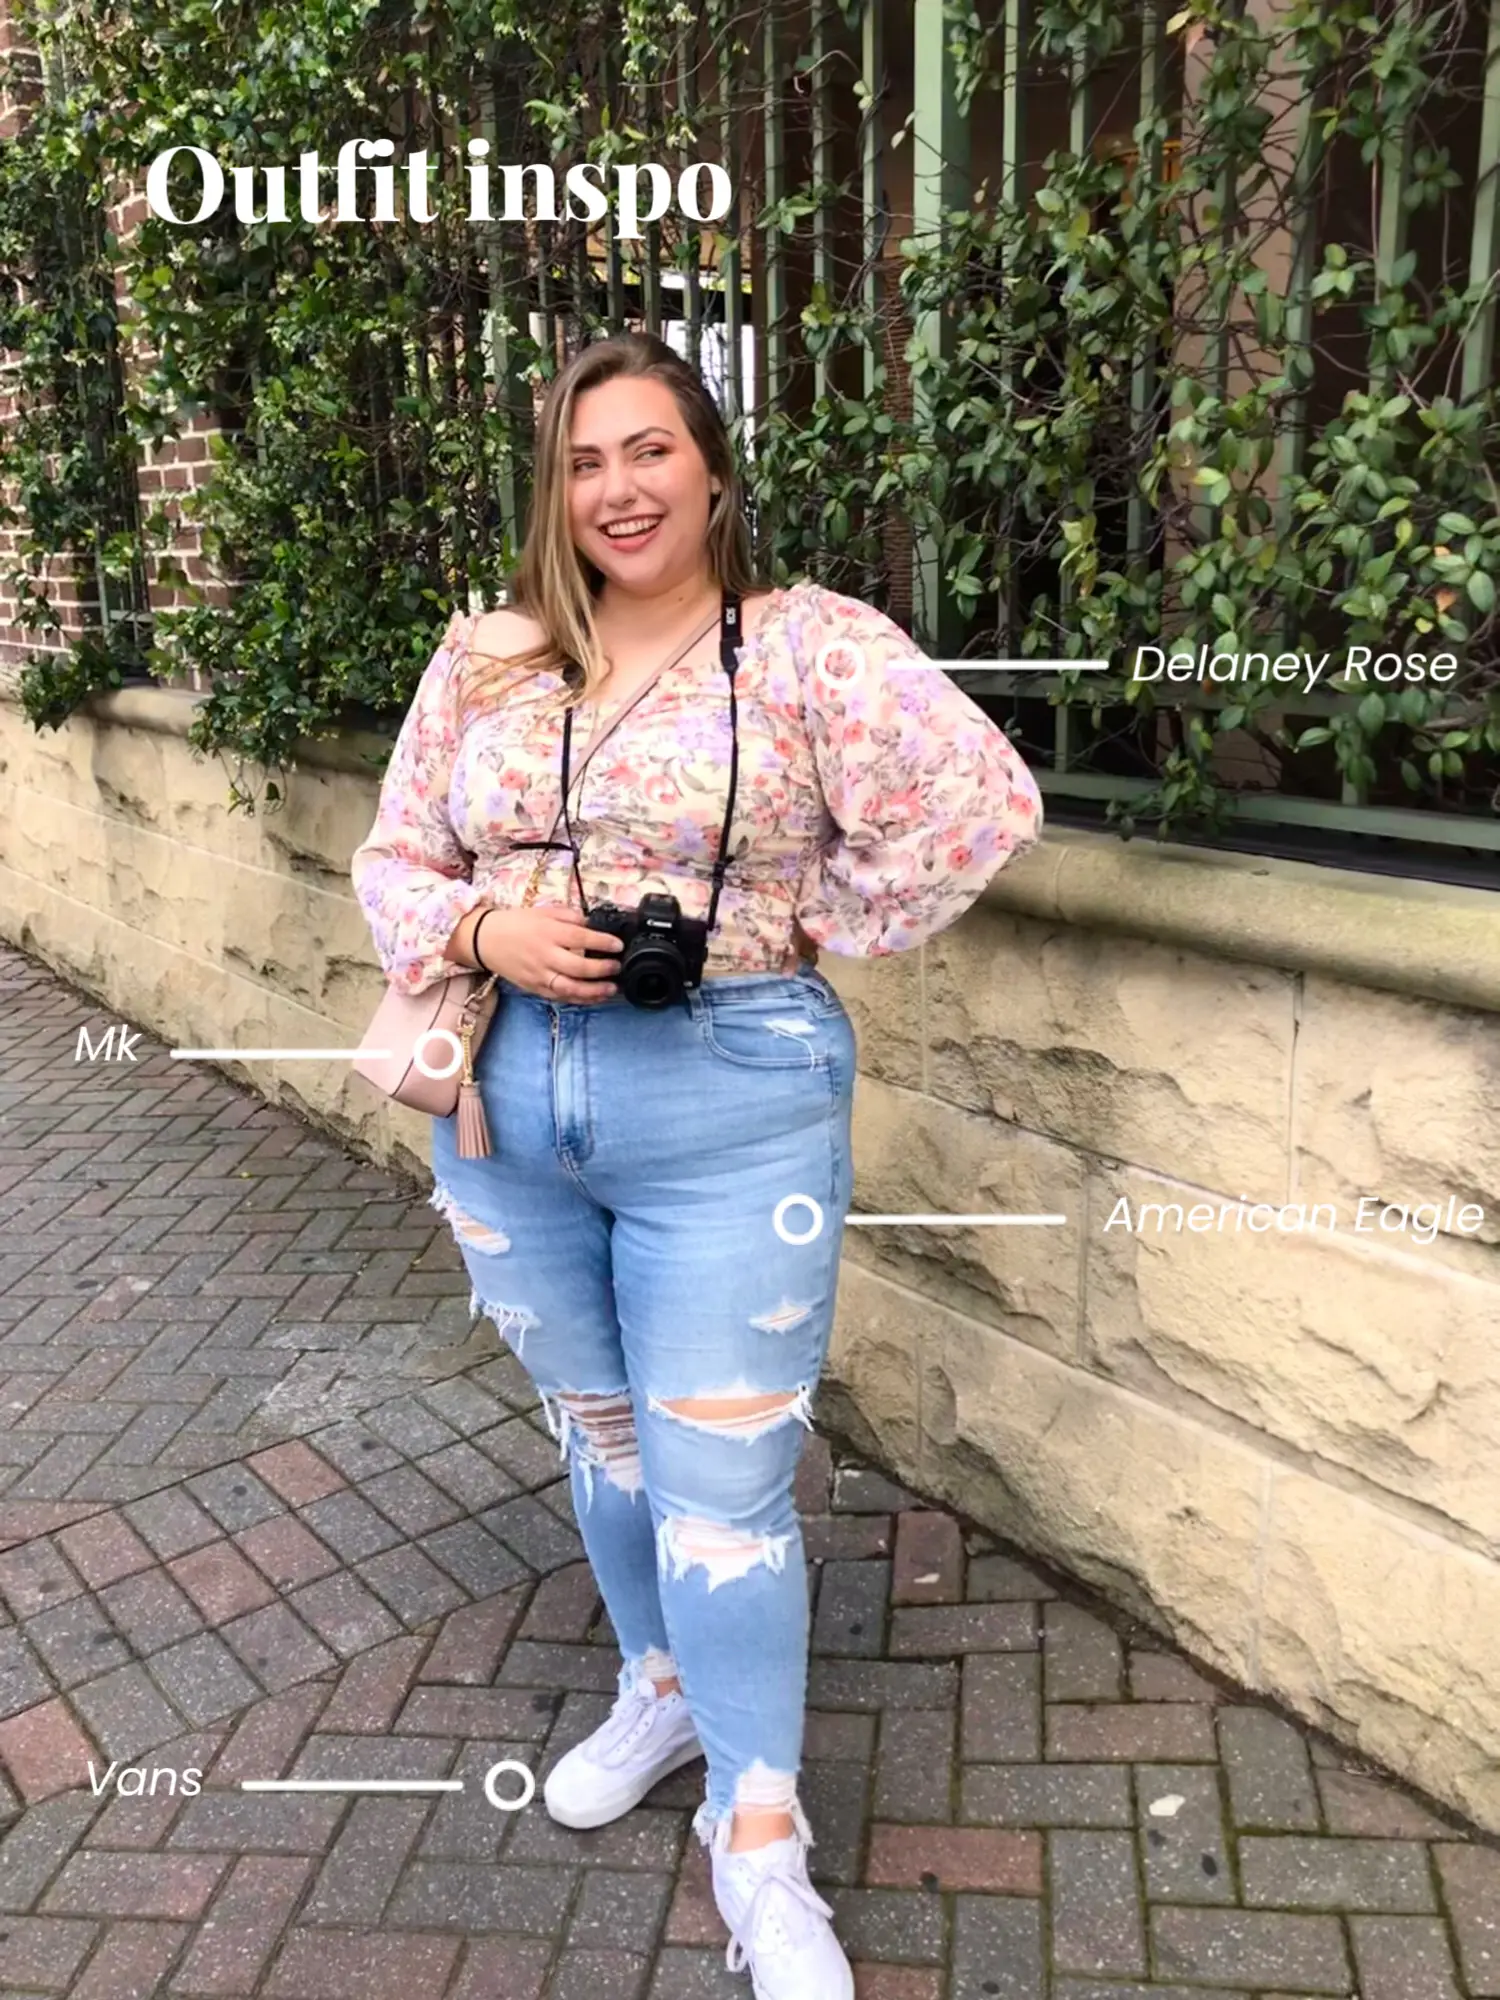 Plus size outfit inspo 🥰, Gallery posted by Kristen Miller